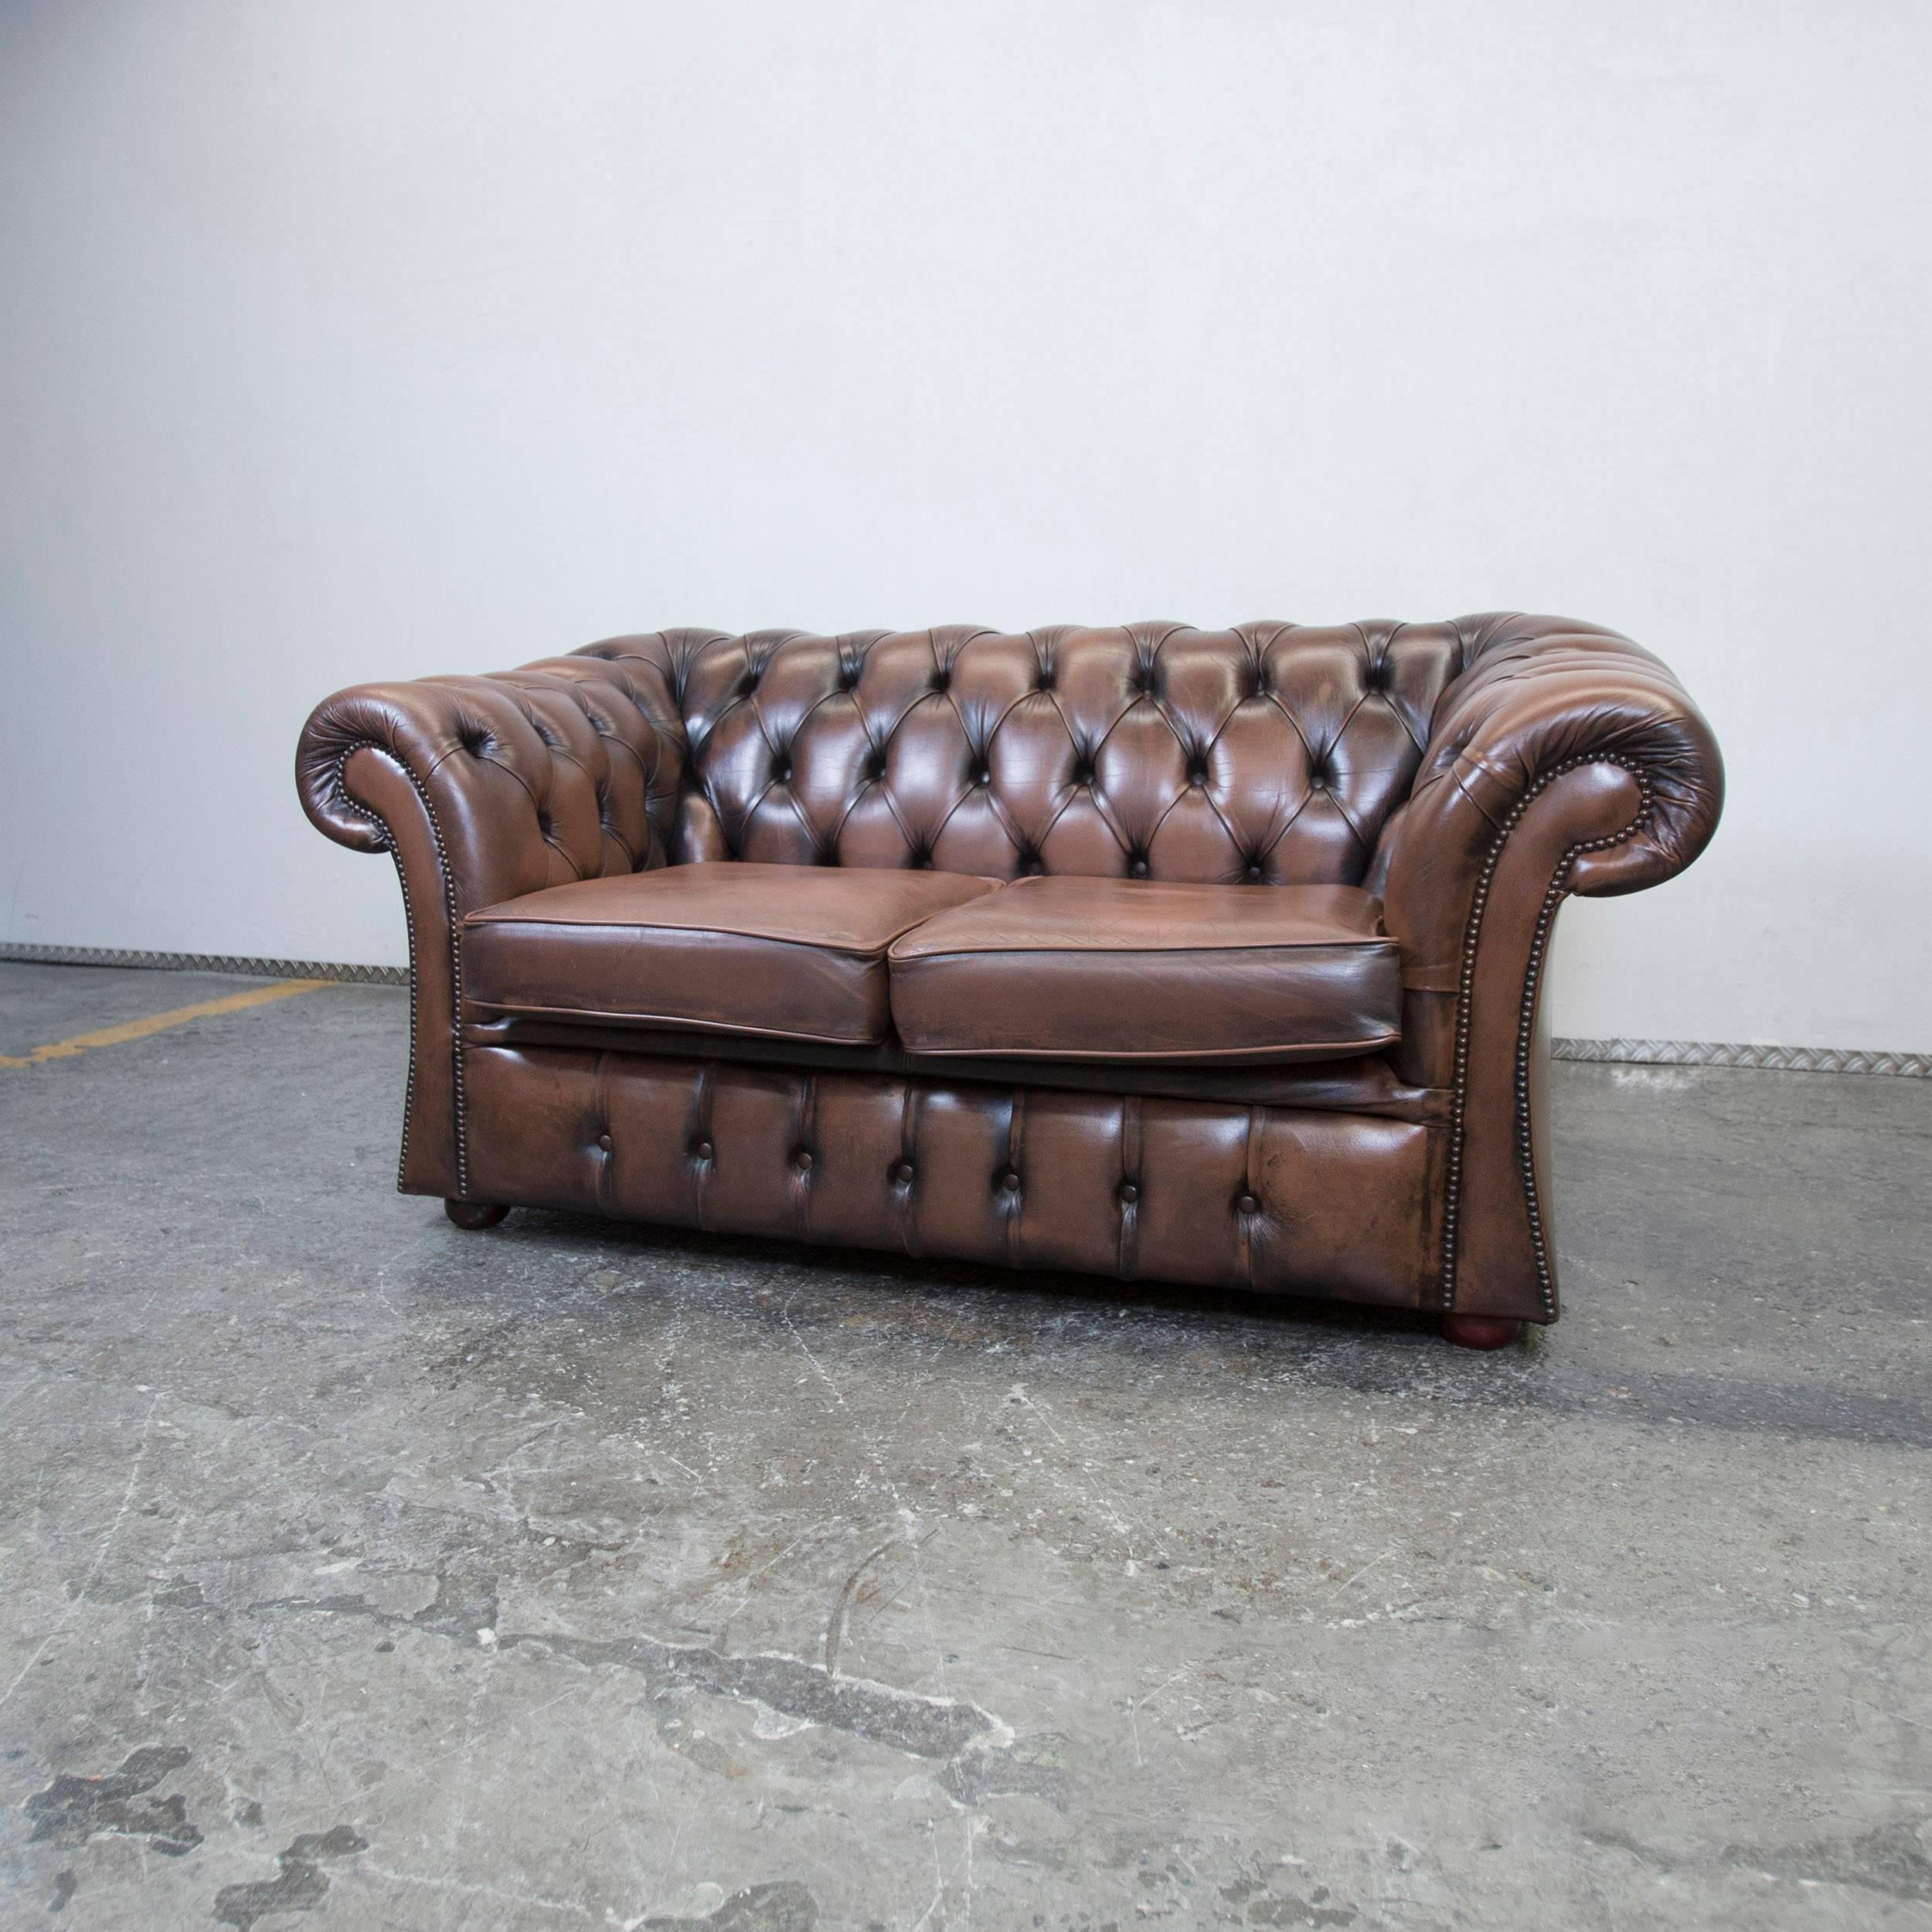 Chesterfield Leather Sofa Brown Two-Seat Couch Retro Vintage 1